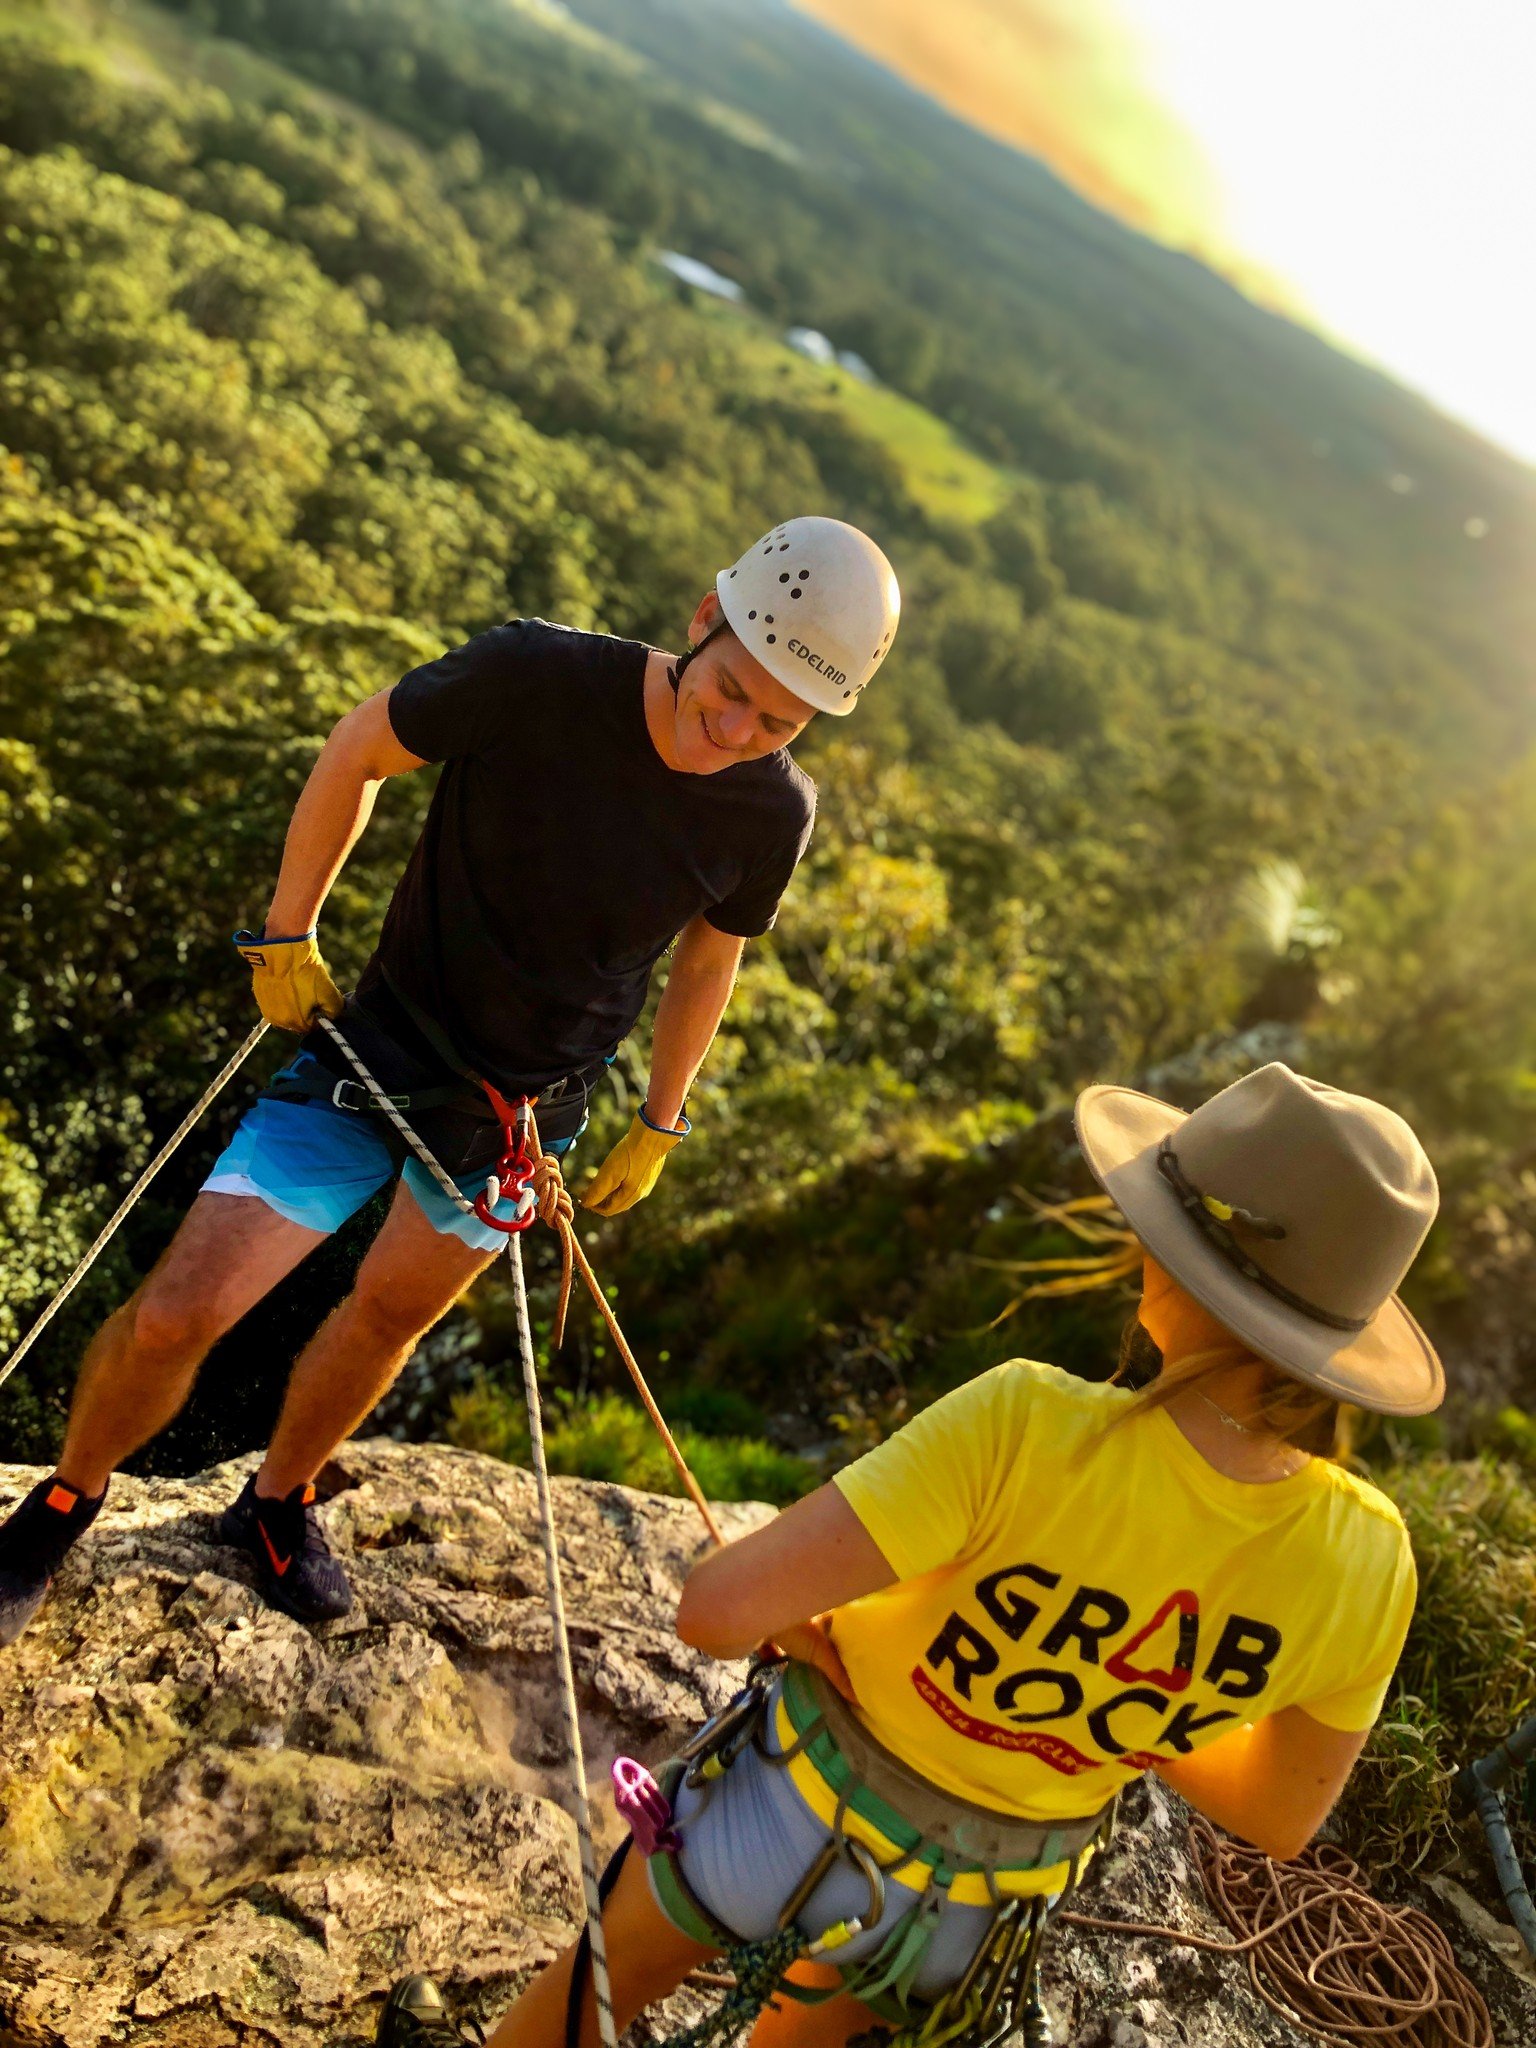 Ready for an adrenaline-pumping adventure? Join us for an unforgettable abseiling tour! Feel the thrill as you descend down towering cliffs surrounded by breathtaking landscapes. Our experienced guides will ensure your safety every step of the way, w